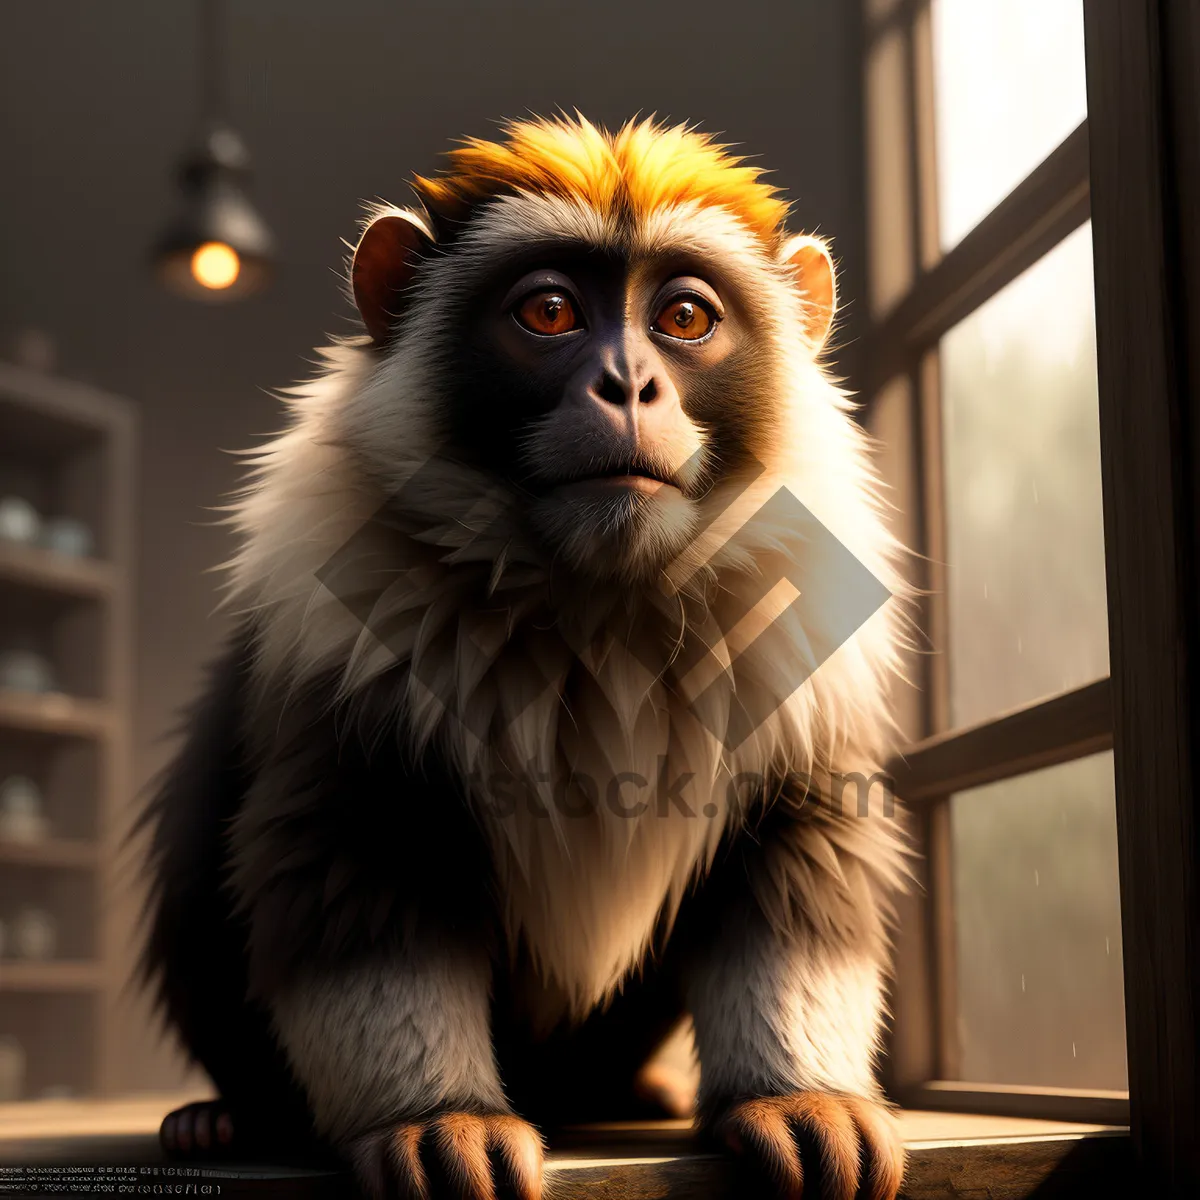 Picture of Majestic Wild Ape: Marmoset Monkey with Piercing Eyes